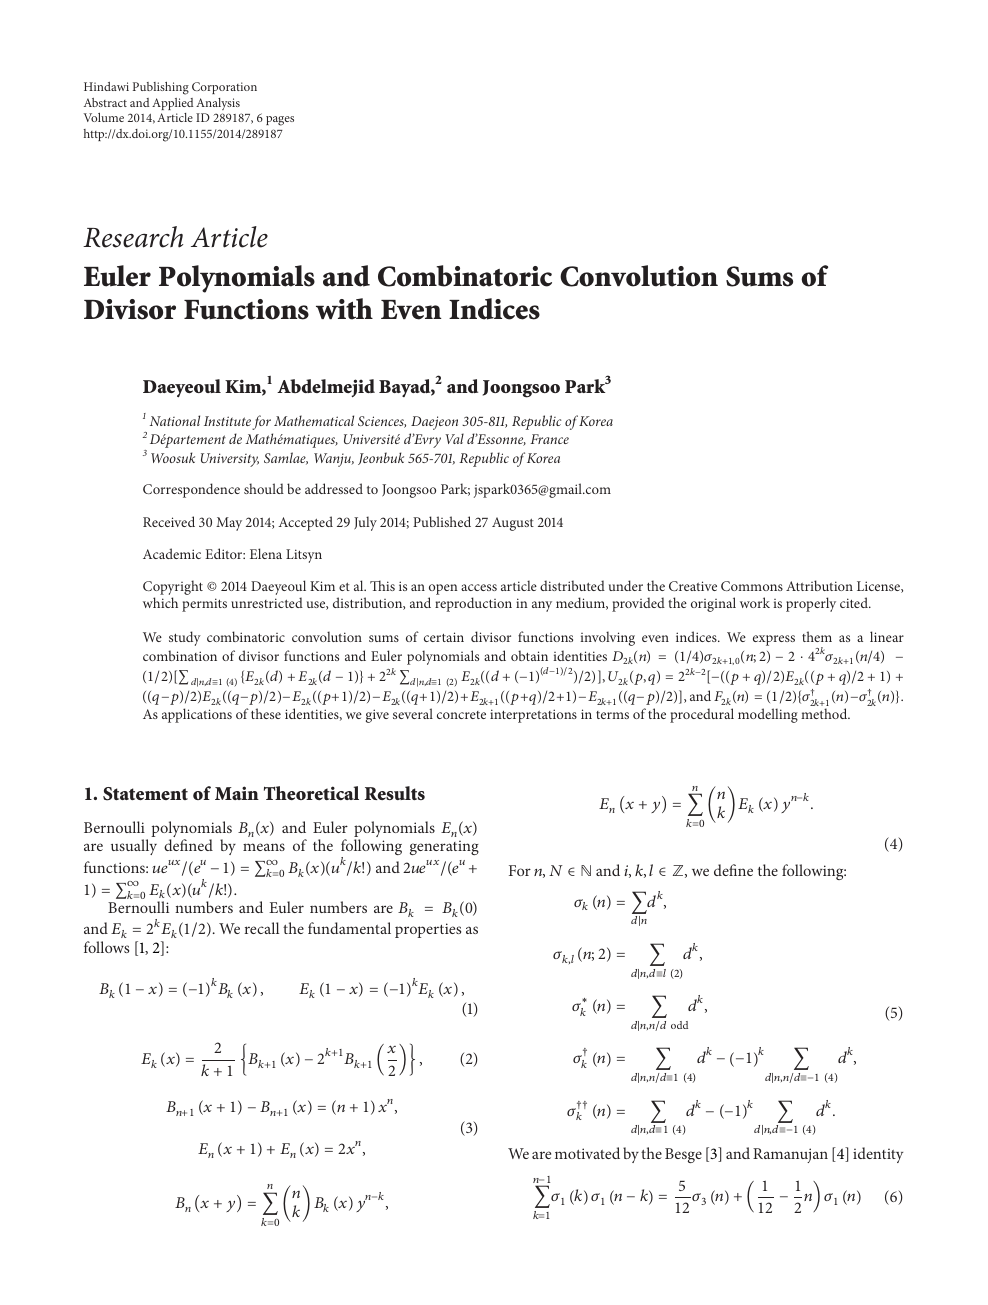 Euler Polynomials And Combinatoric Convolution Sums Of Divisor Functions With Even Indices Topic Of Research Paper In Mathematics Download Scholarly Article Pdf And Read For Free On Cyberleninka Open Science Hub